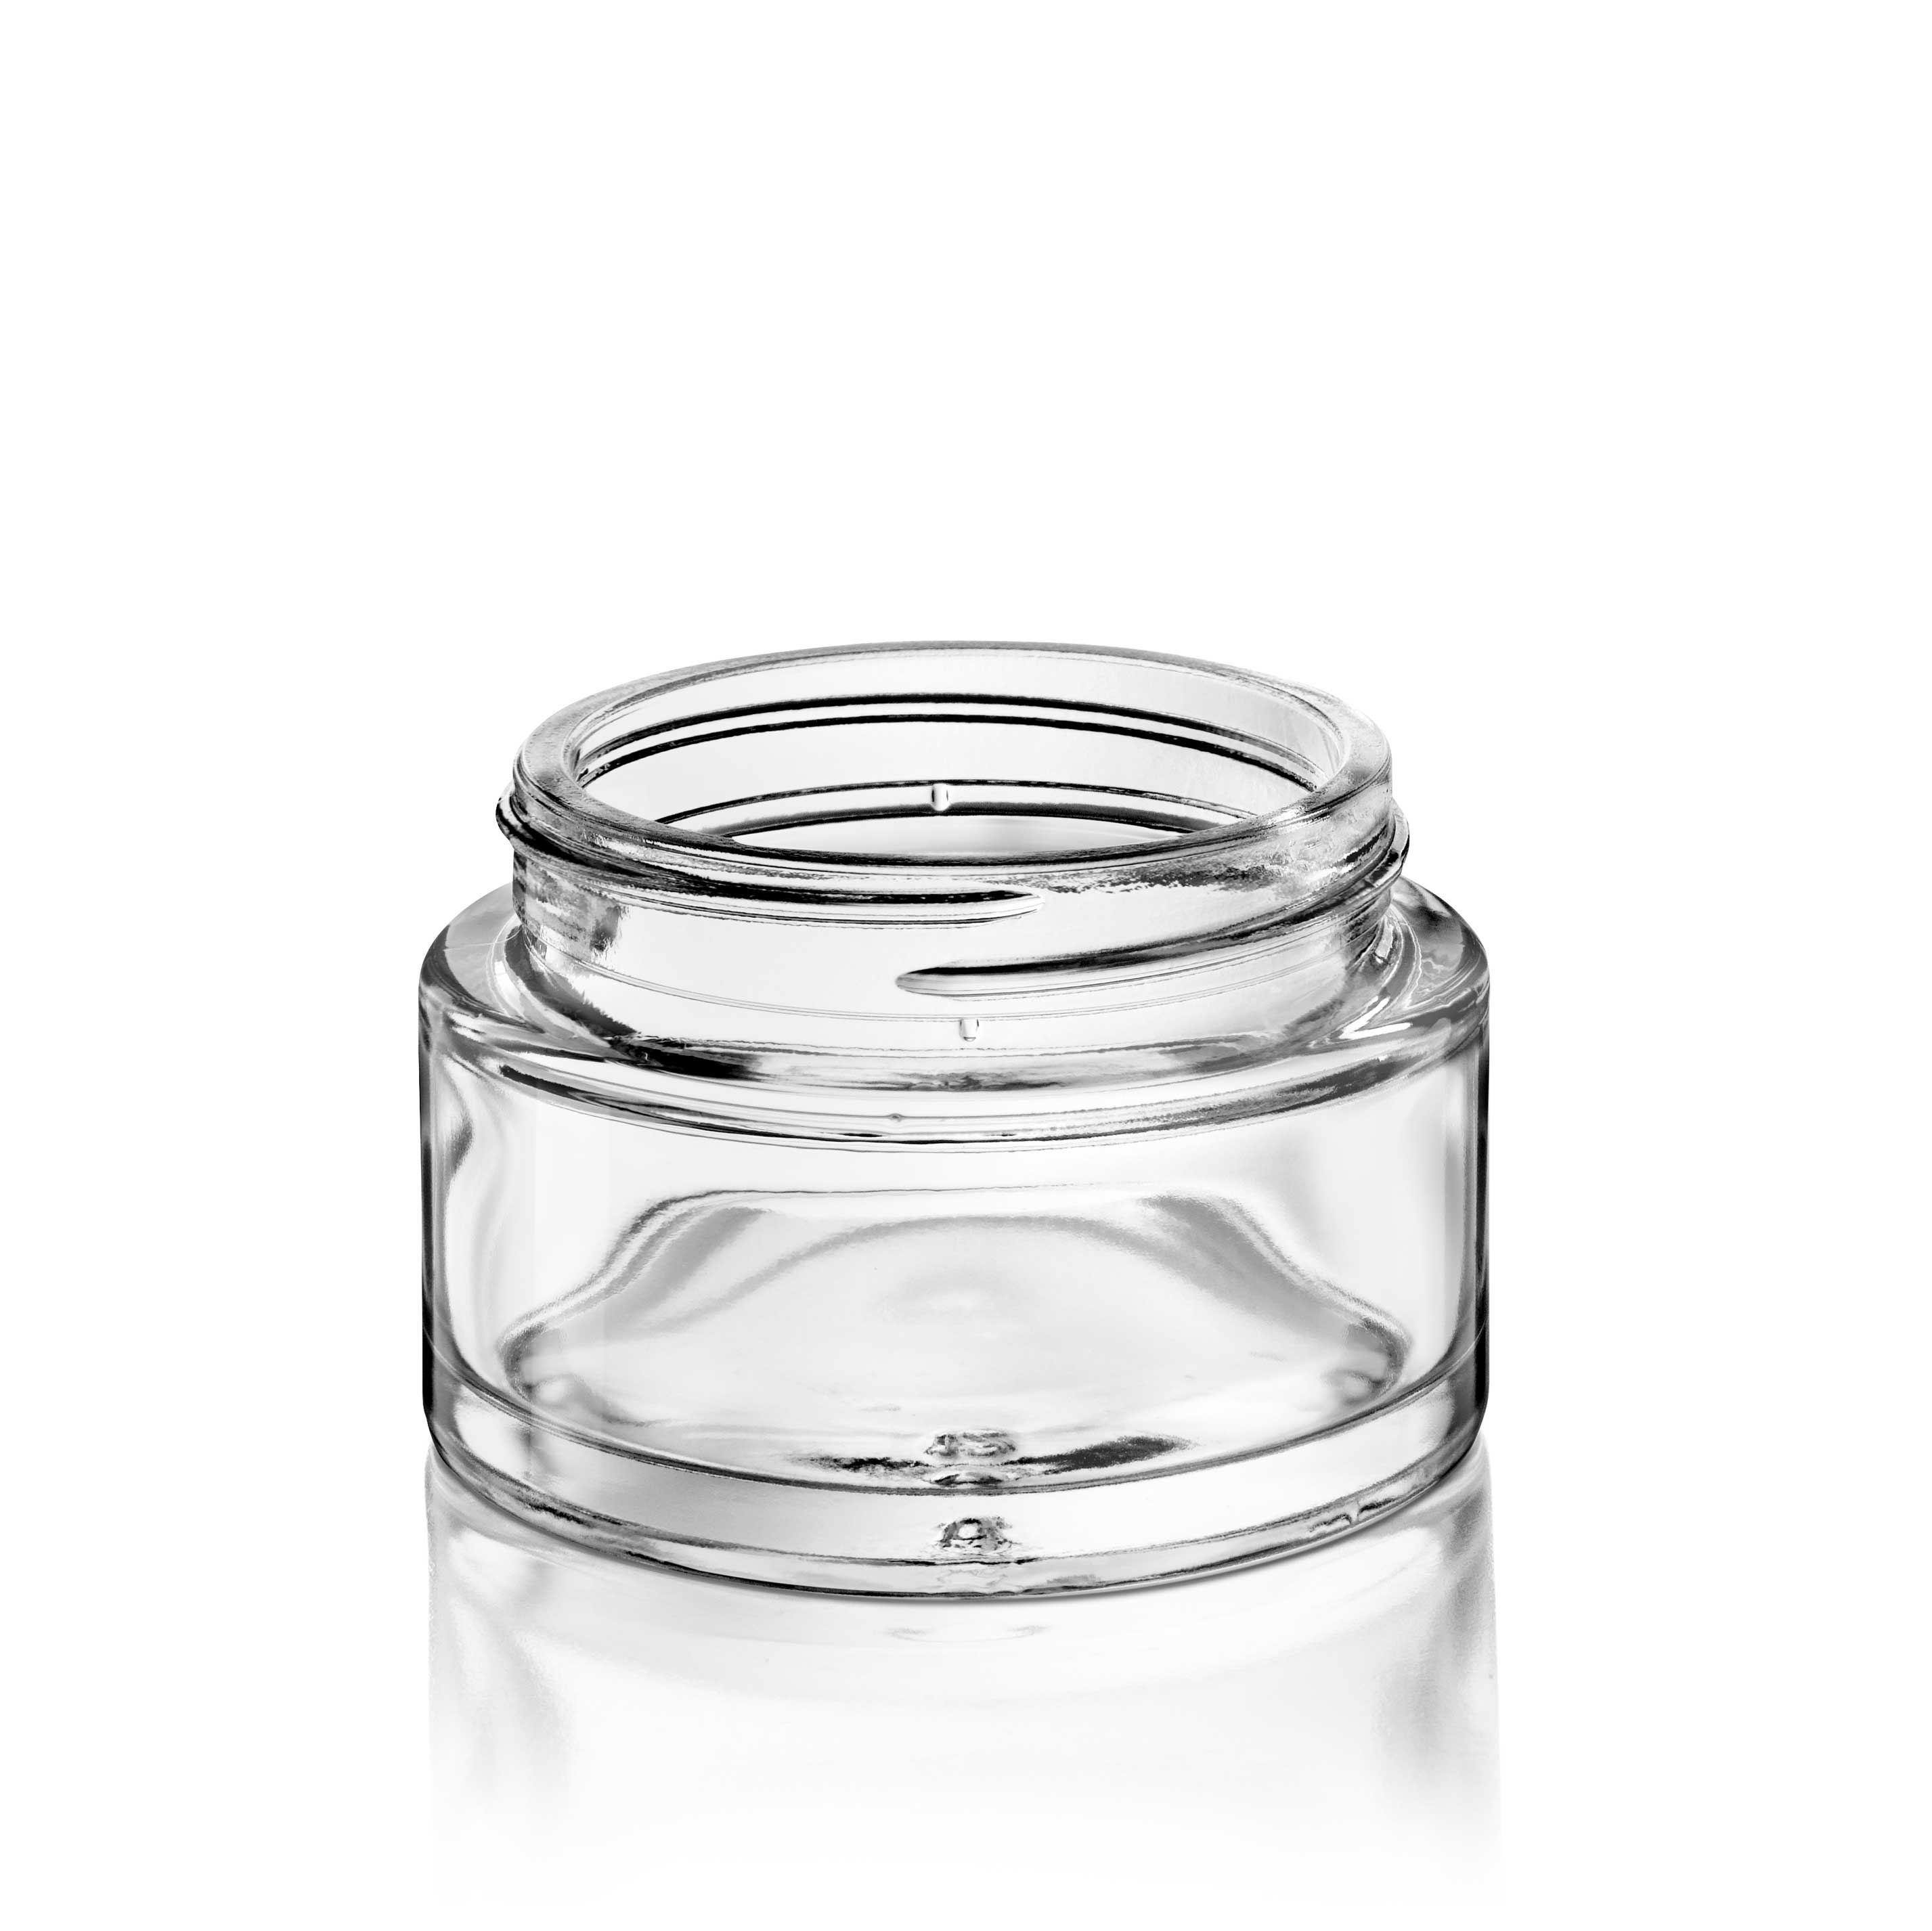 Cosmetic jar Camellia 60 ml, 55 special thread, fit for child-resistant lid, Flint